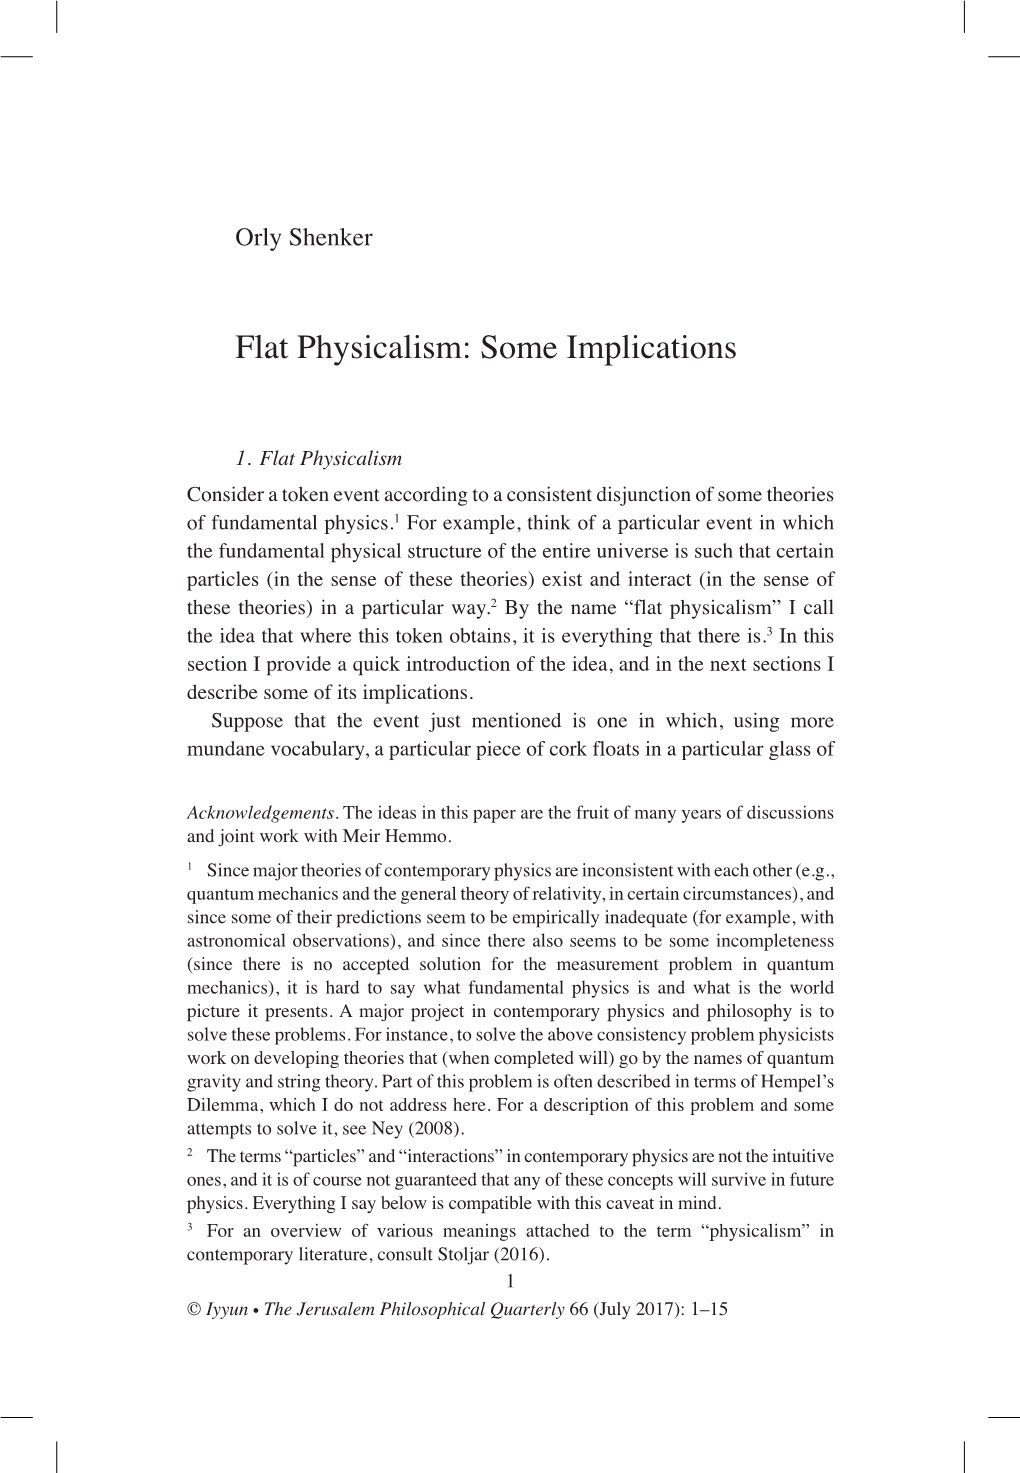 Flat Physicalism: Some Implications